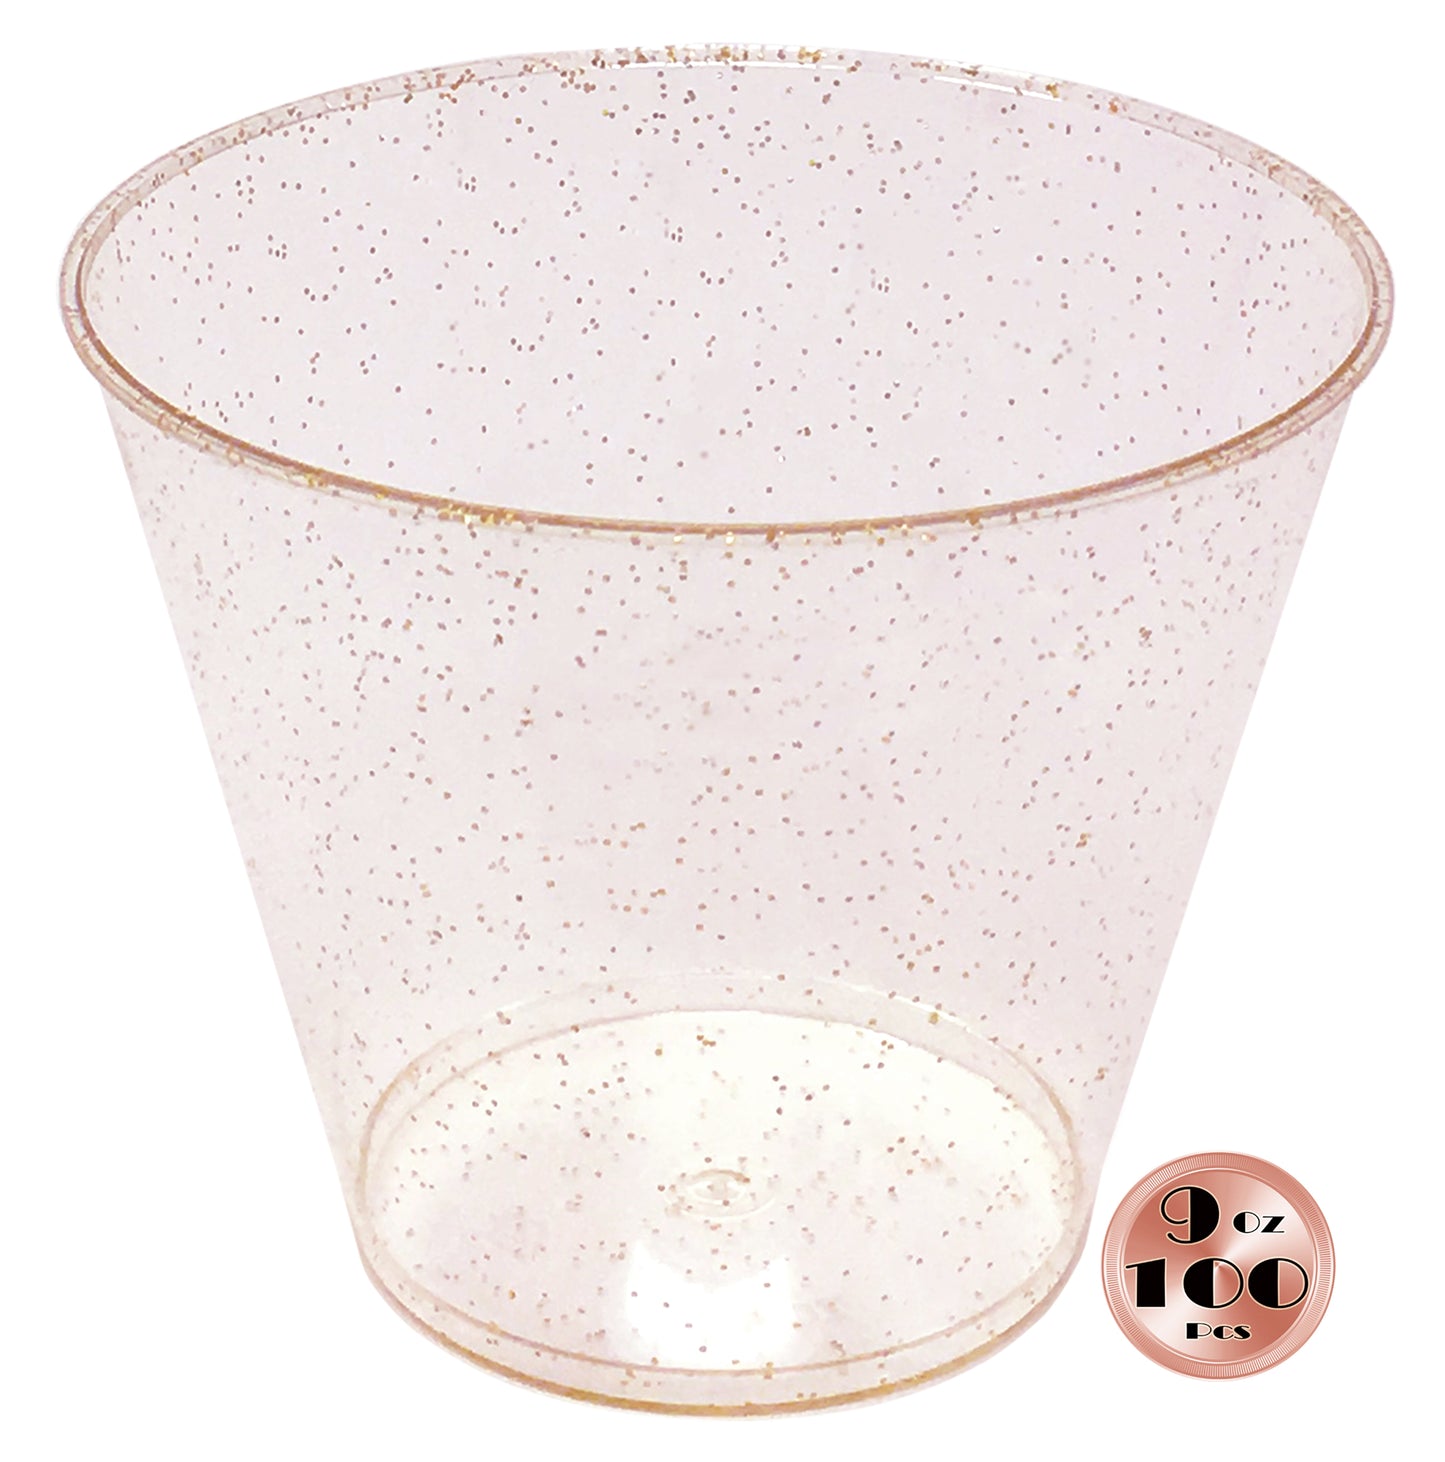 JL Prime 100 Rose Gold Glitter Plastic Cups, 9 Oz Heavy Duty Reusable Disposable Rose Gold Glitter Clear Plastic Cups, Old Fashioned Tumblers, Hard Plastic Drinking Cups for Party and Wedding